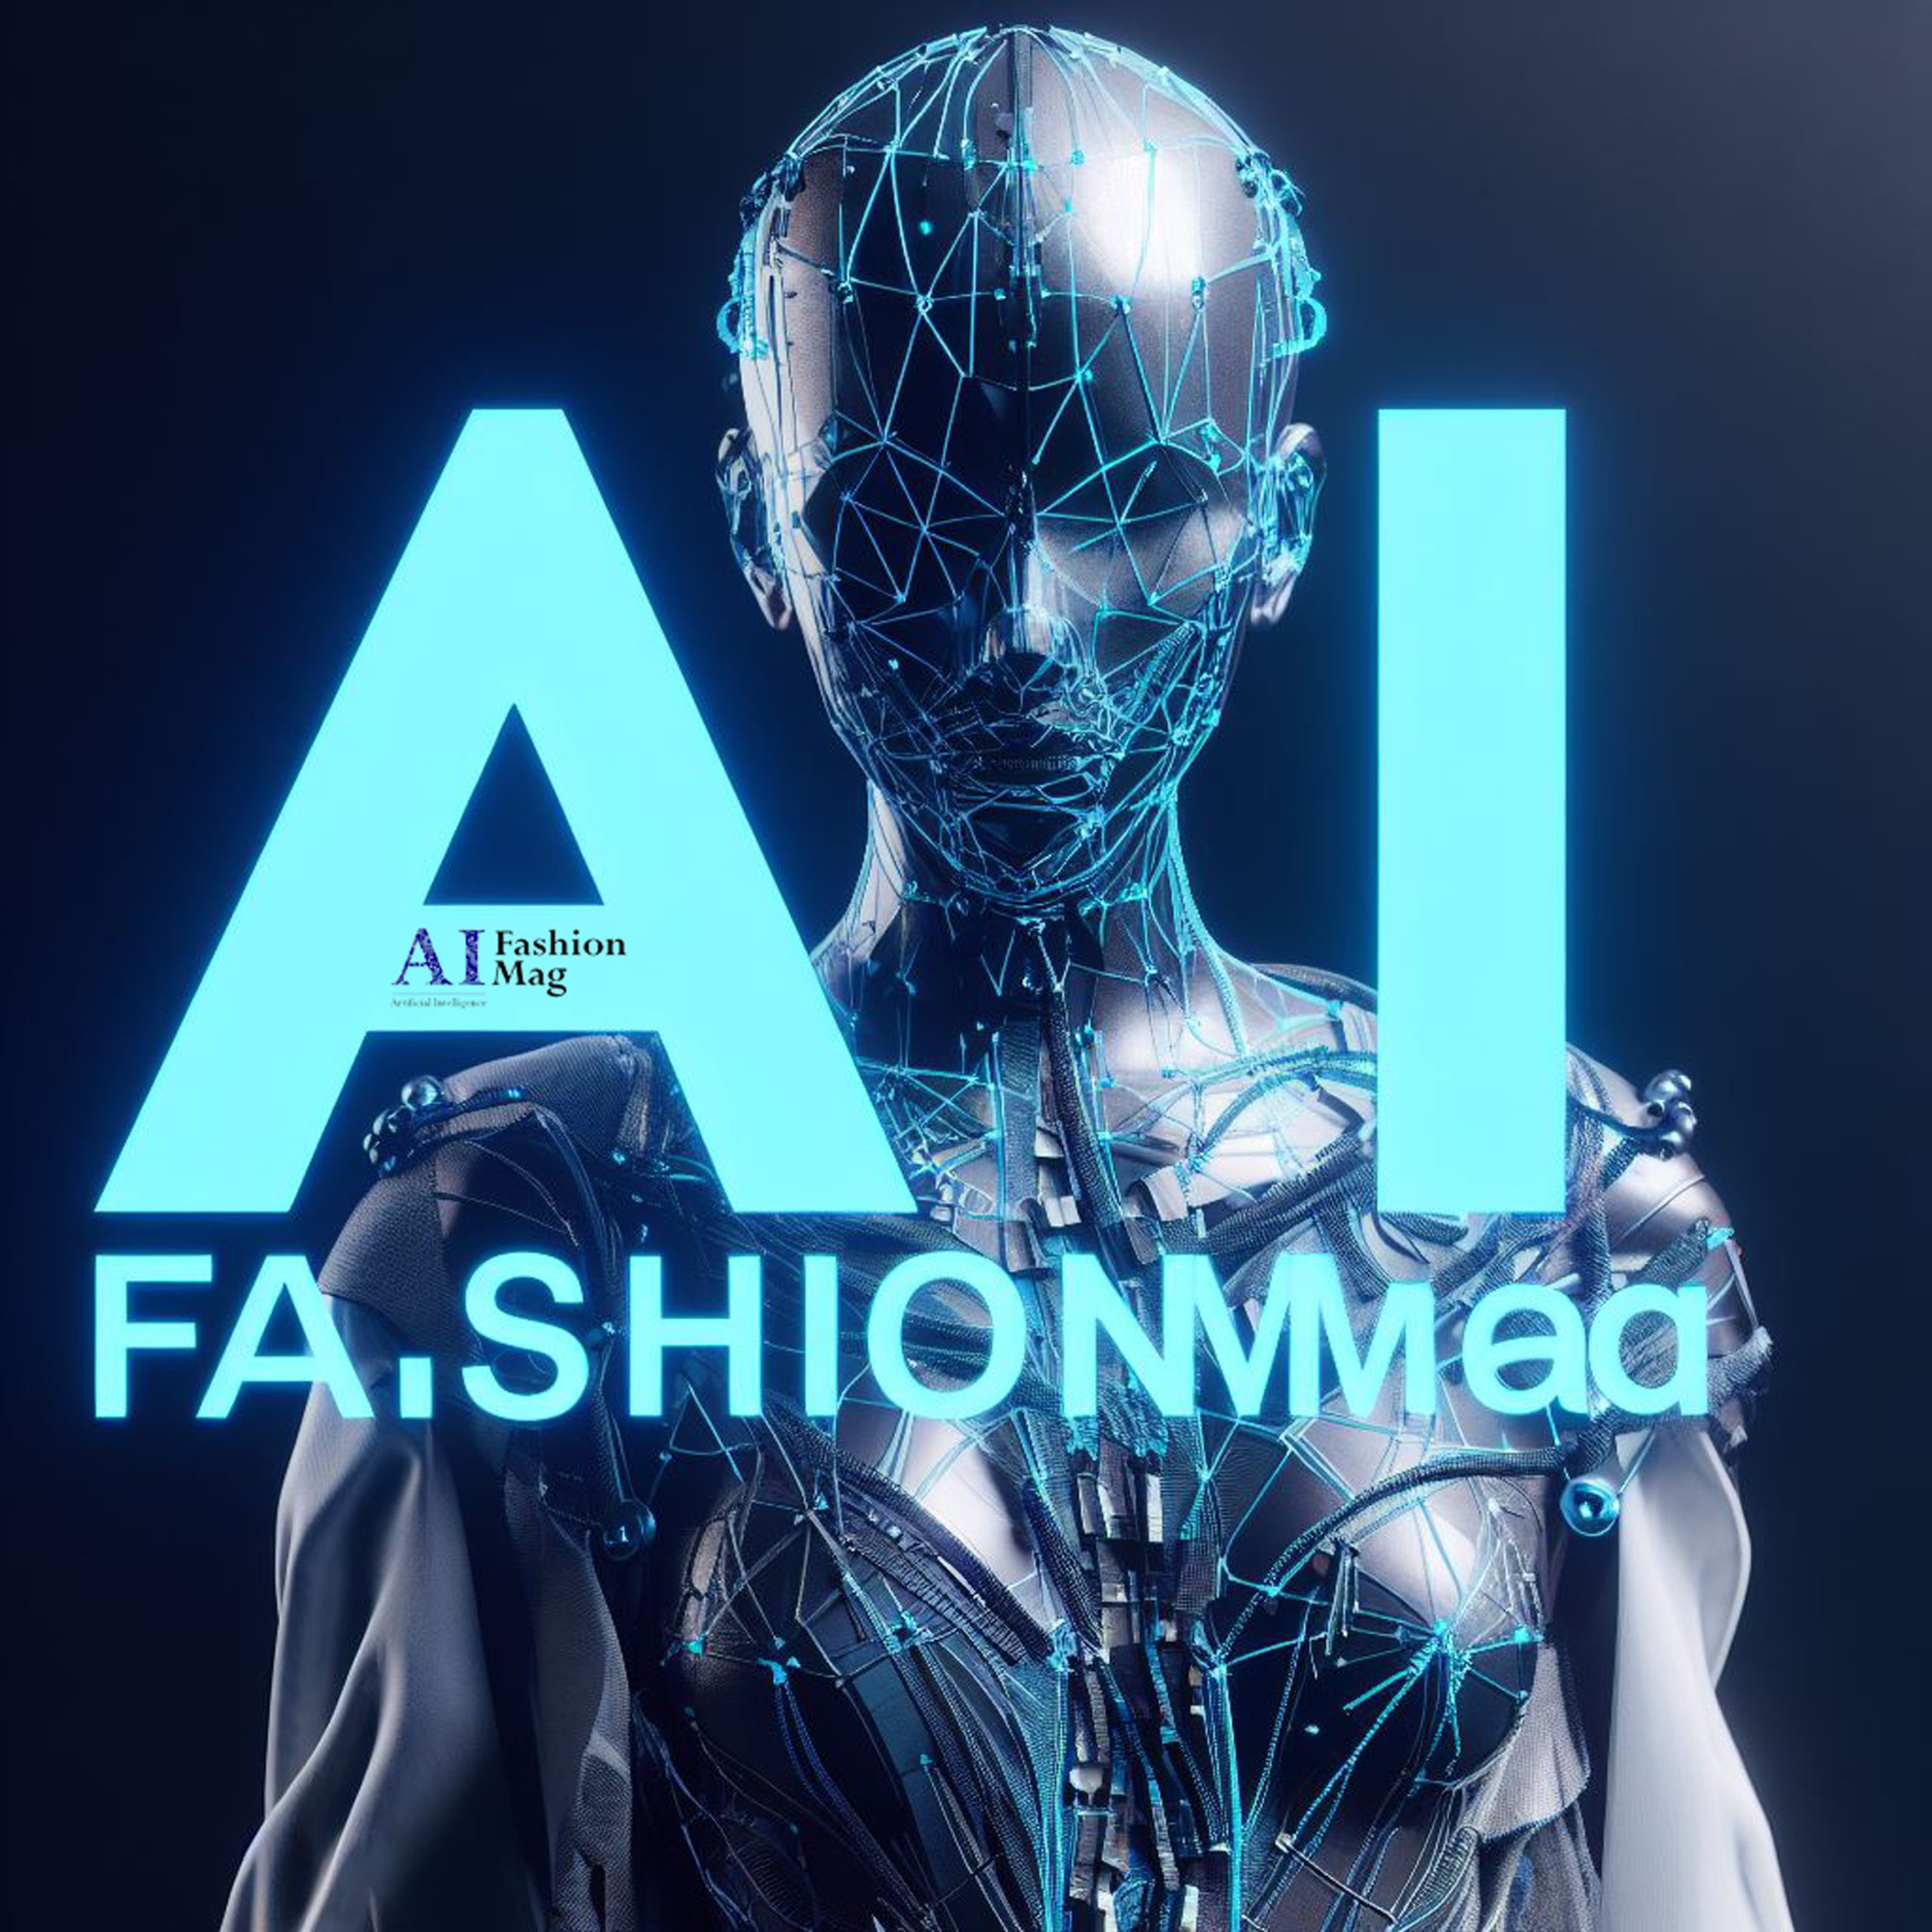 AI-FashionMag-provide-Exclusive-Contents,-analysis-from-experts